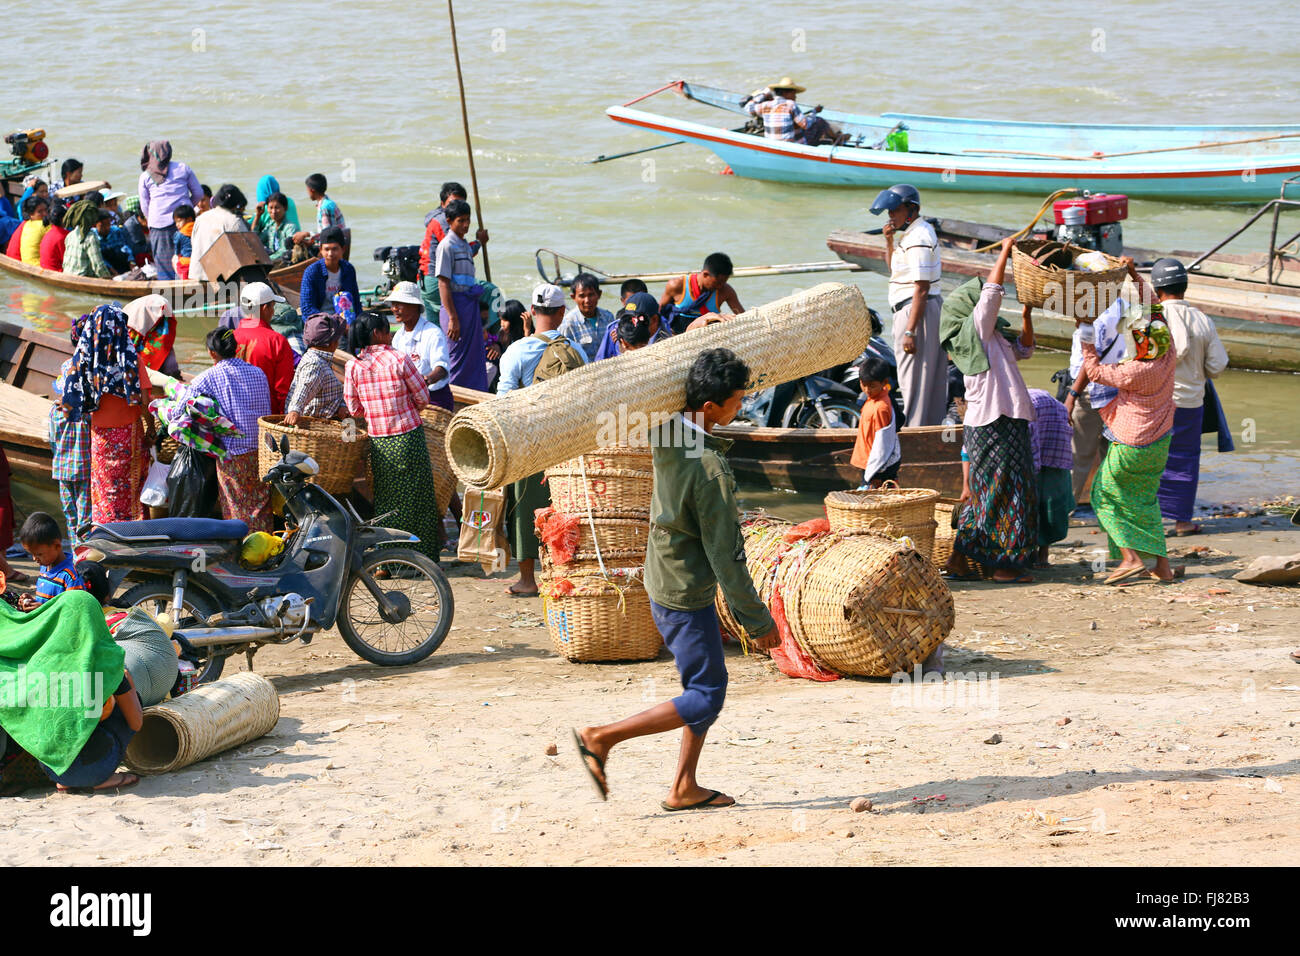 People loading and unloading ferry boats on the Ayeryarwaddy River in Old Bagan, Bagan, Myanmar (Burma) Stock Photo